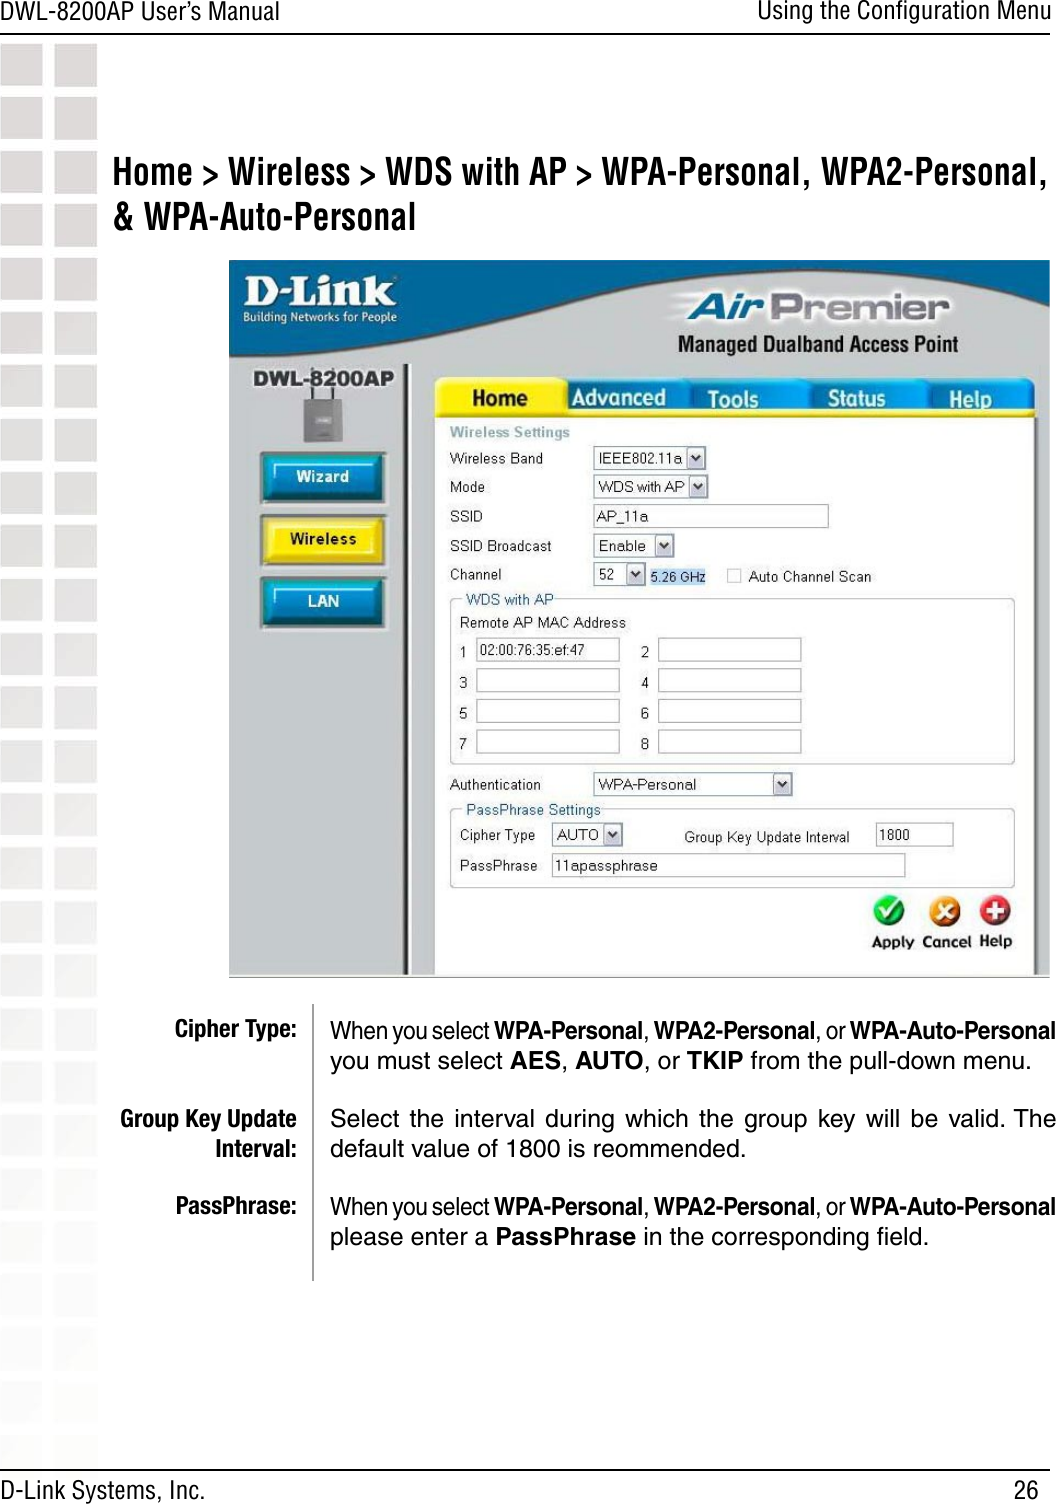 26DWL-8200AP User’s ManualD-Link Systems, Inc.Using the Conﬁguration MenuHome &gt; Wireless &gt; WDS with AP &gt; WPA-Personal, WPA2-Personal, &amp; WPA-Auto-PersonalWhen you select WPA-Personal, WPA2-Personal, or WPA-Auto-Personal you must select AES, AUTO, or TKIP from the pull-down menu.Select  the  interval during  which  the  group  key will  be valid. The default value of 1800 is reommended.When you select WPA-Personal, WPA2-Personal, or WPA-Auto-Personal please enter a PassPhrase in the corresponding ﬁeld.Cipher Type:Group Key Update Interval:PassPhrase: